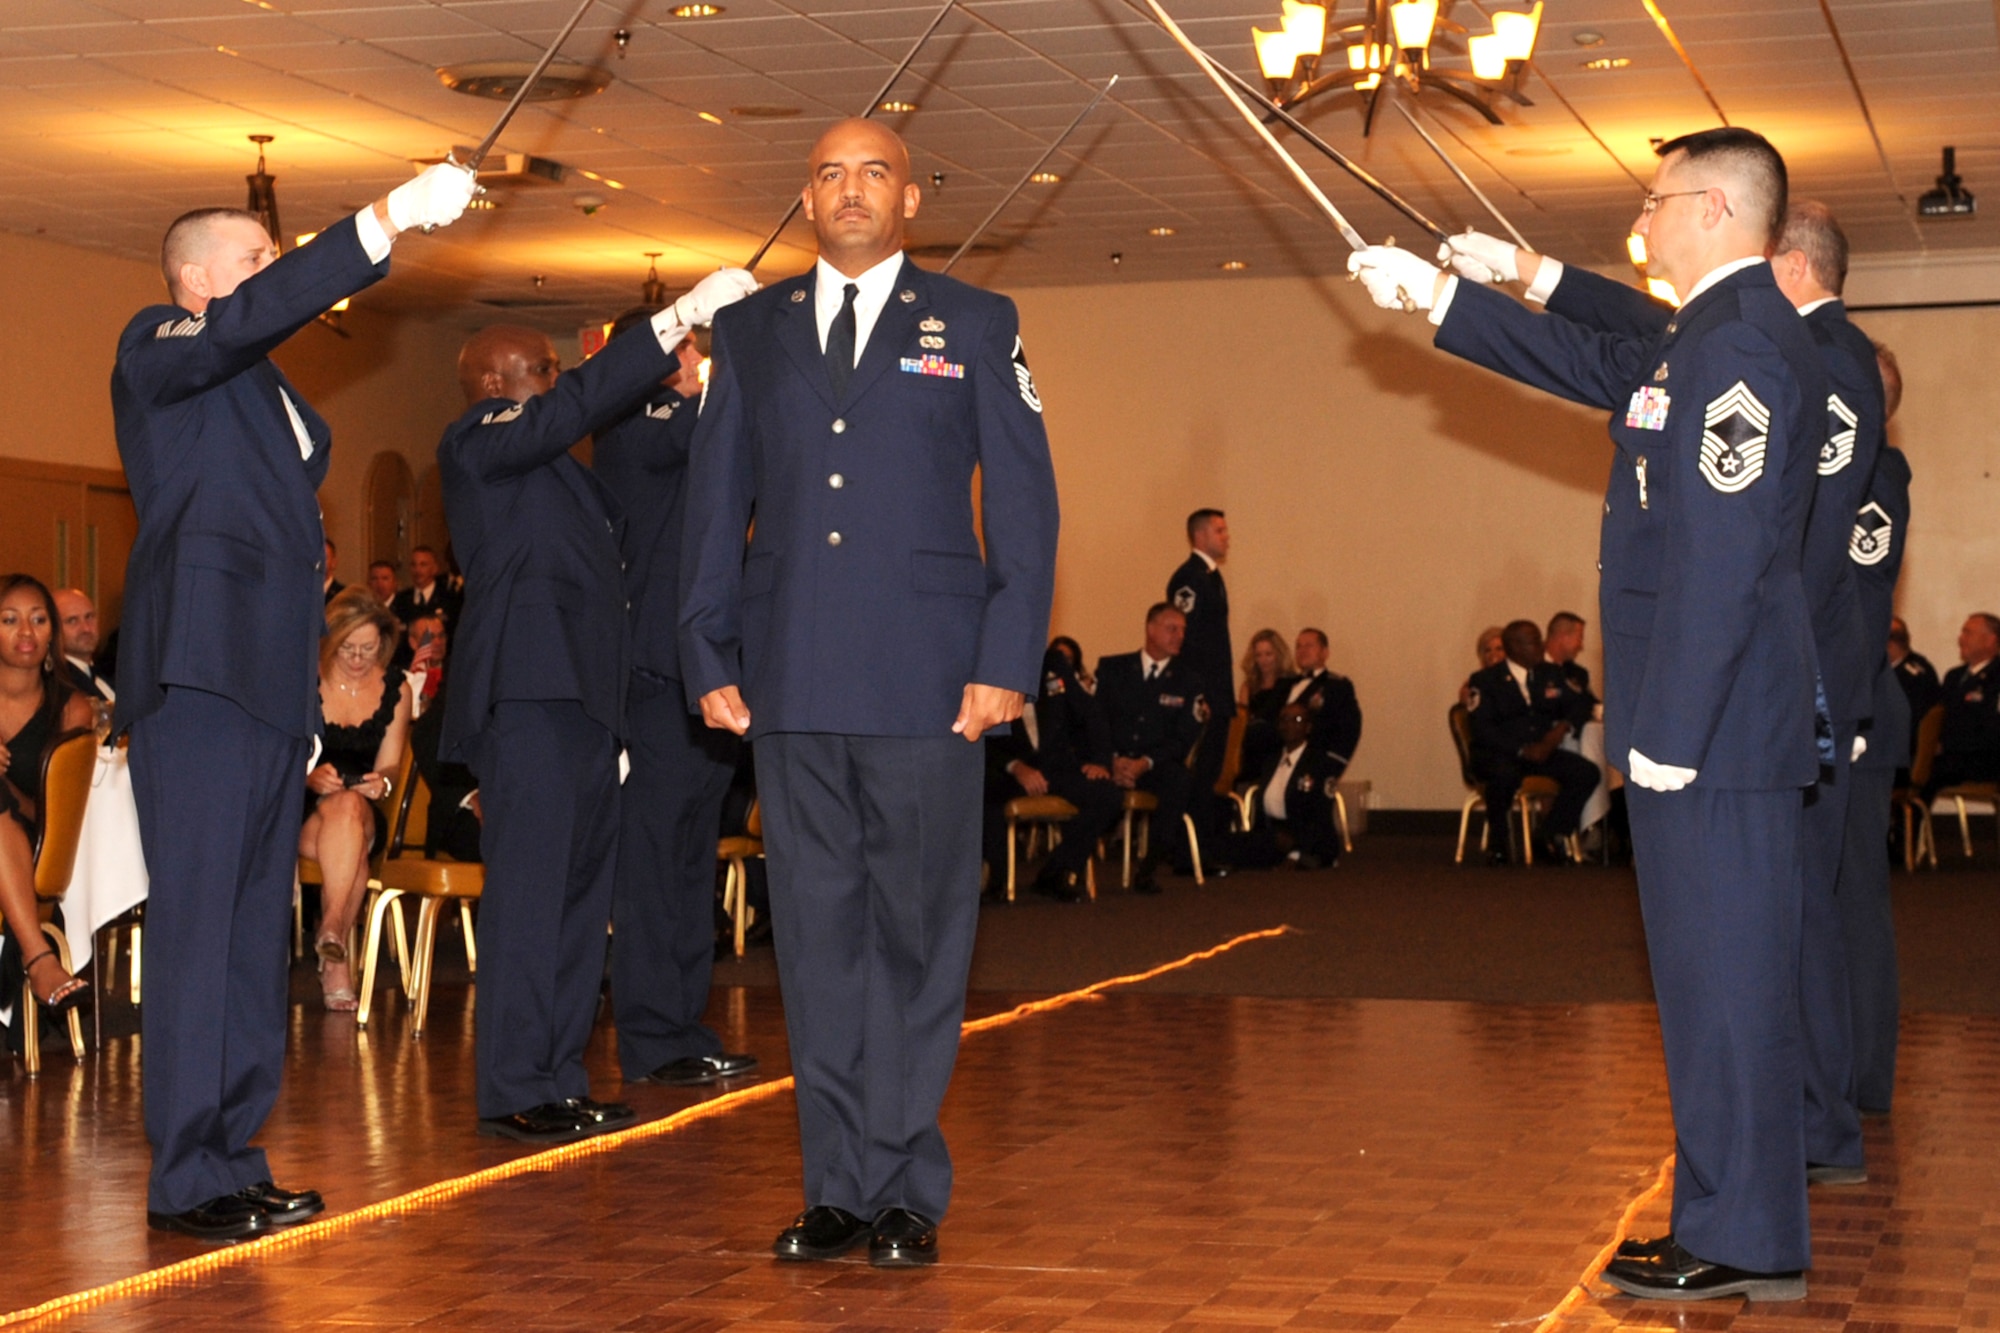 U.S. Air Force Master Sgt. Shaun Piernas passes underneath a sword cordon during the Senior Noncommisioned Officer Induction Ceremony at Barksdale Air Force Base, La., Sept. 10, 2011. The ceremony is held annually to recognize newly promoted Master Sgts. within the 307th BW, 917th Fighter Group and the 307th Rapid Engineer Deployable Heavy Operations Repair Squadron Engineers. (U.S. Air Force photo by Master Sgt. Greg Steele/Released)